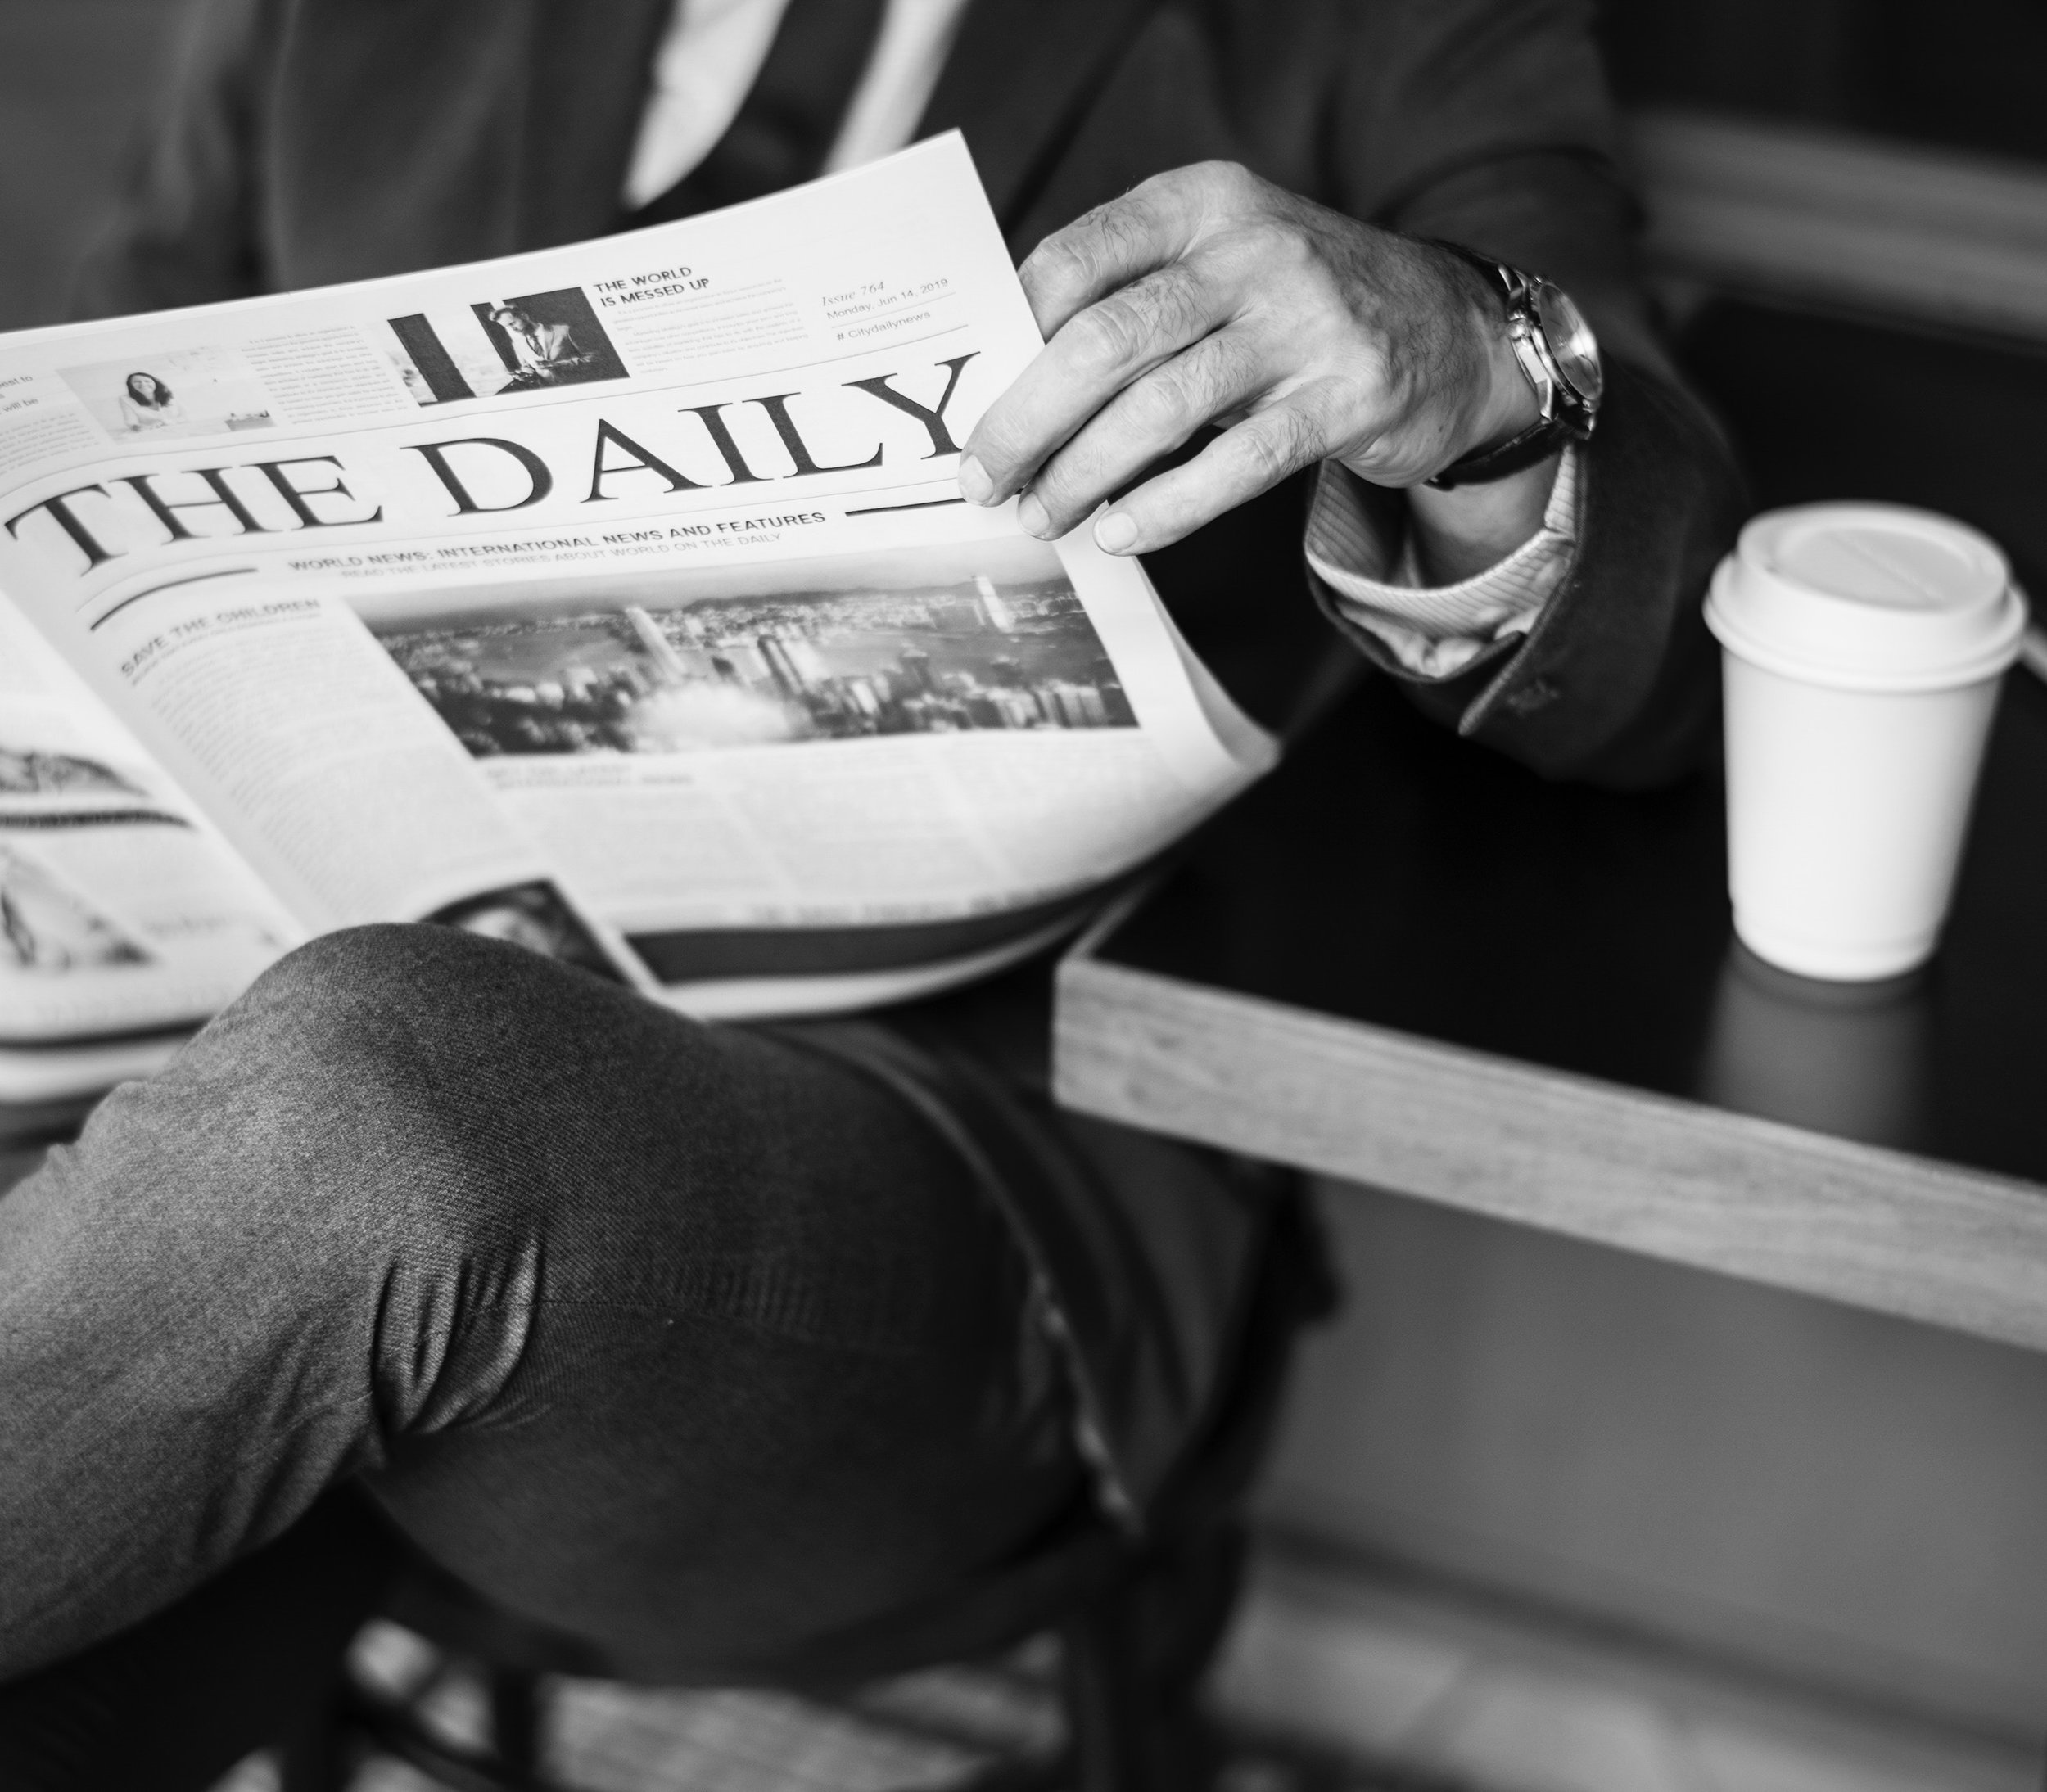 A man sitting on a bench reading a newspaper with a coffee cup next to him